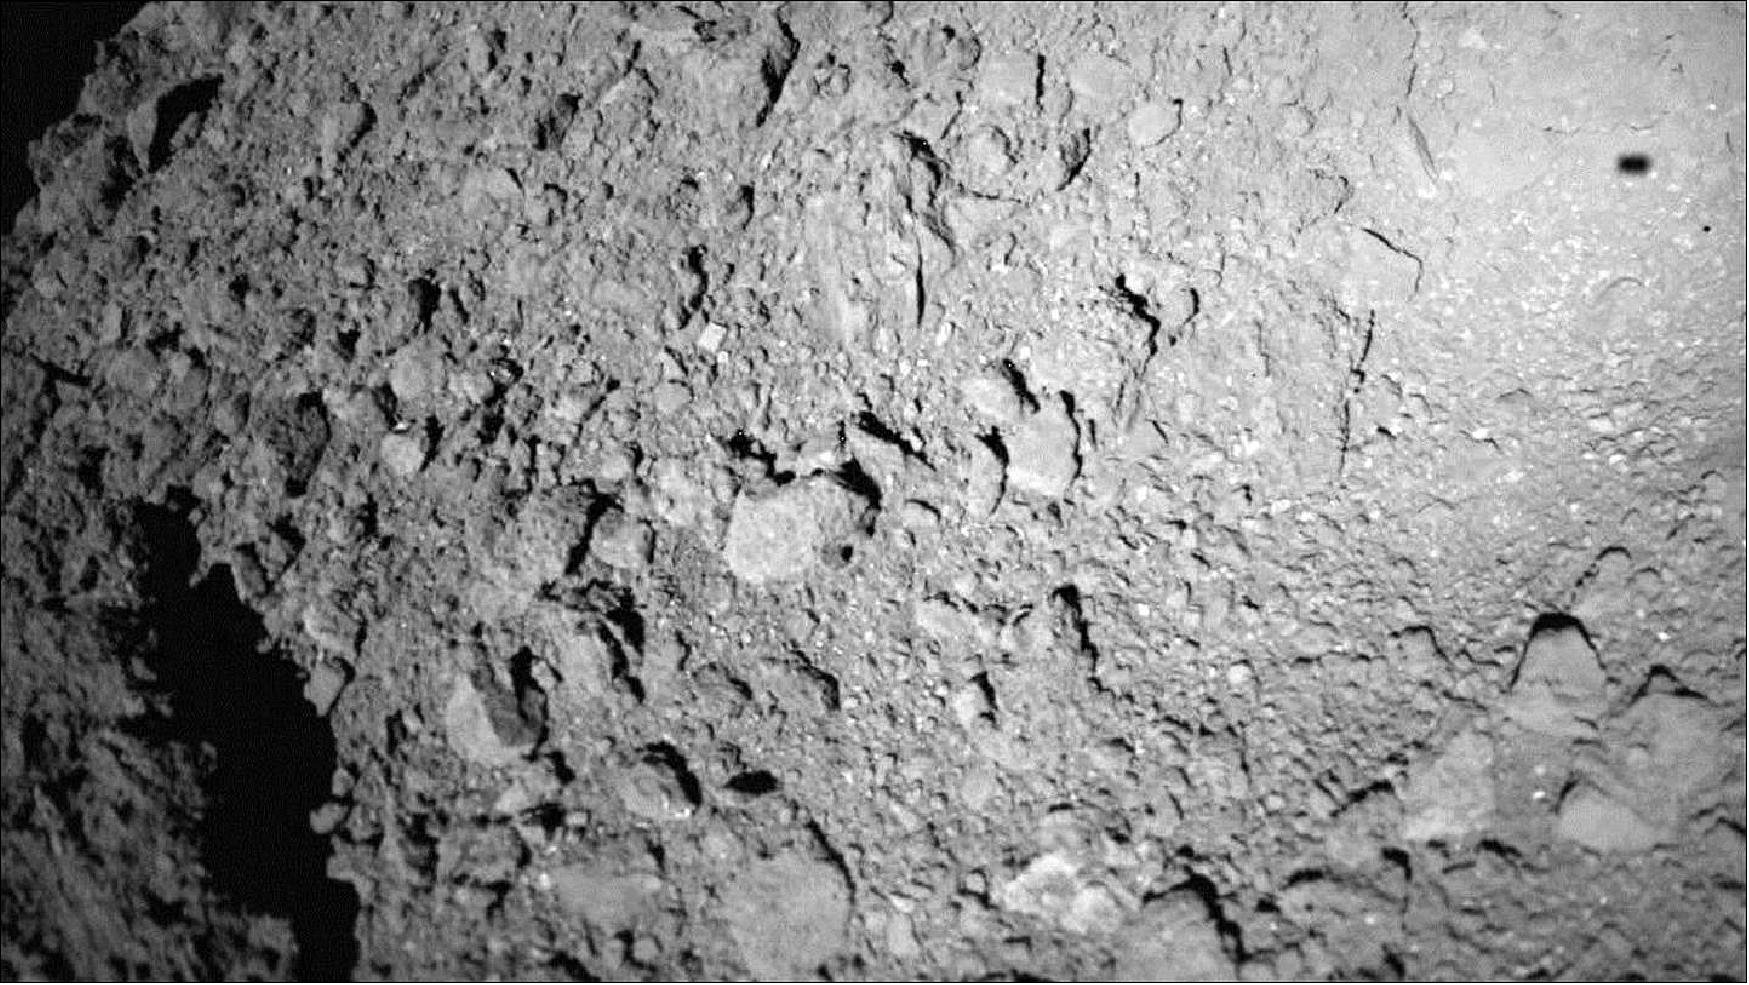 Figure 83: Shadow of MASCOT on asteroid Ryugu during descent: DLR's MasCam on board MASCOT acquired this image as it descended to the the asteroid Ryugu 3.5 minutes after separating from its mothercraft Hayabusa-2. In the image, the lander is ~20 m above the asteroid's surface, and MASCOT's shadow can be seen at the top right (image credit: MASCOT/DLR/JAXA)